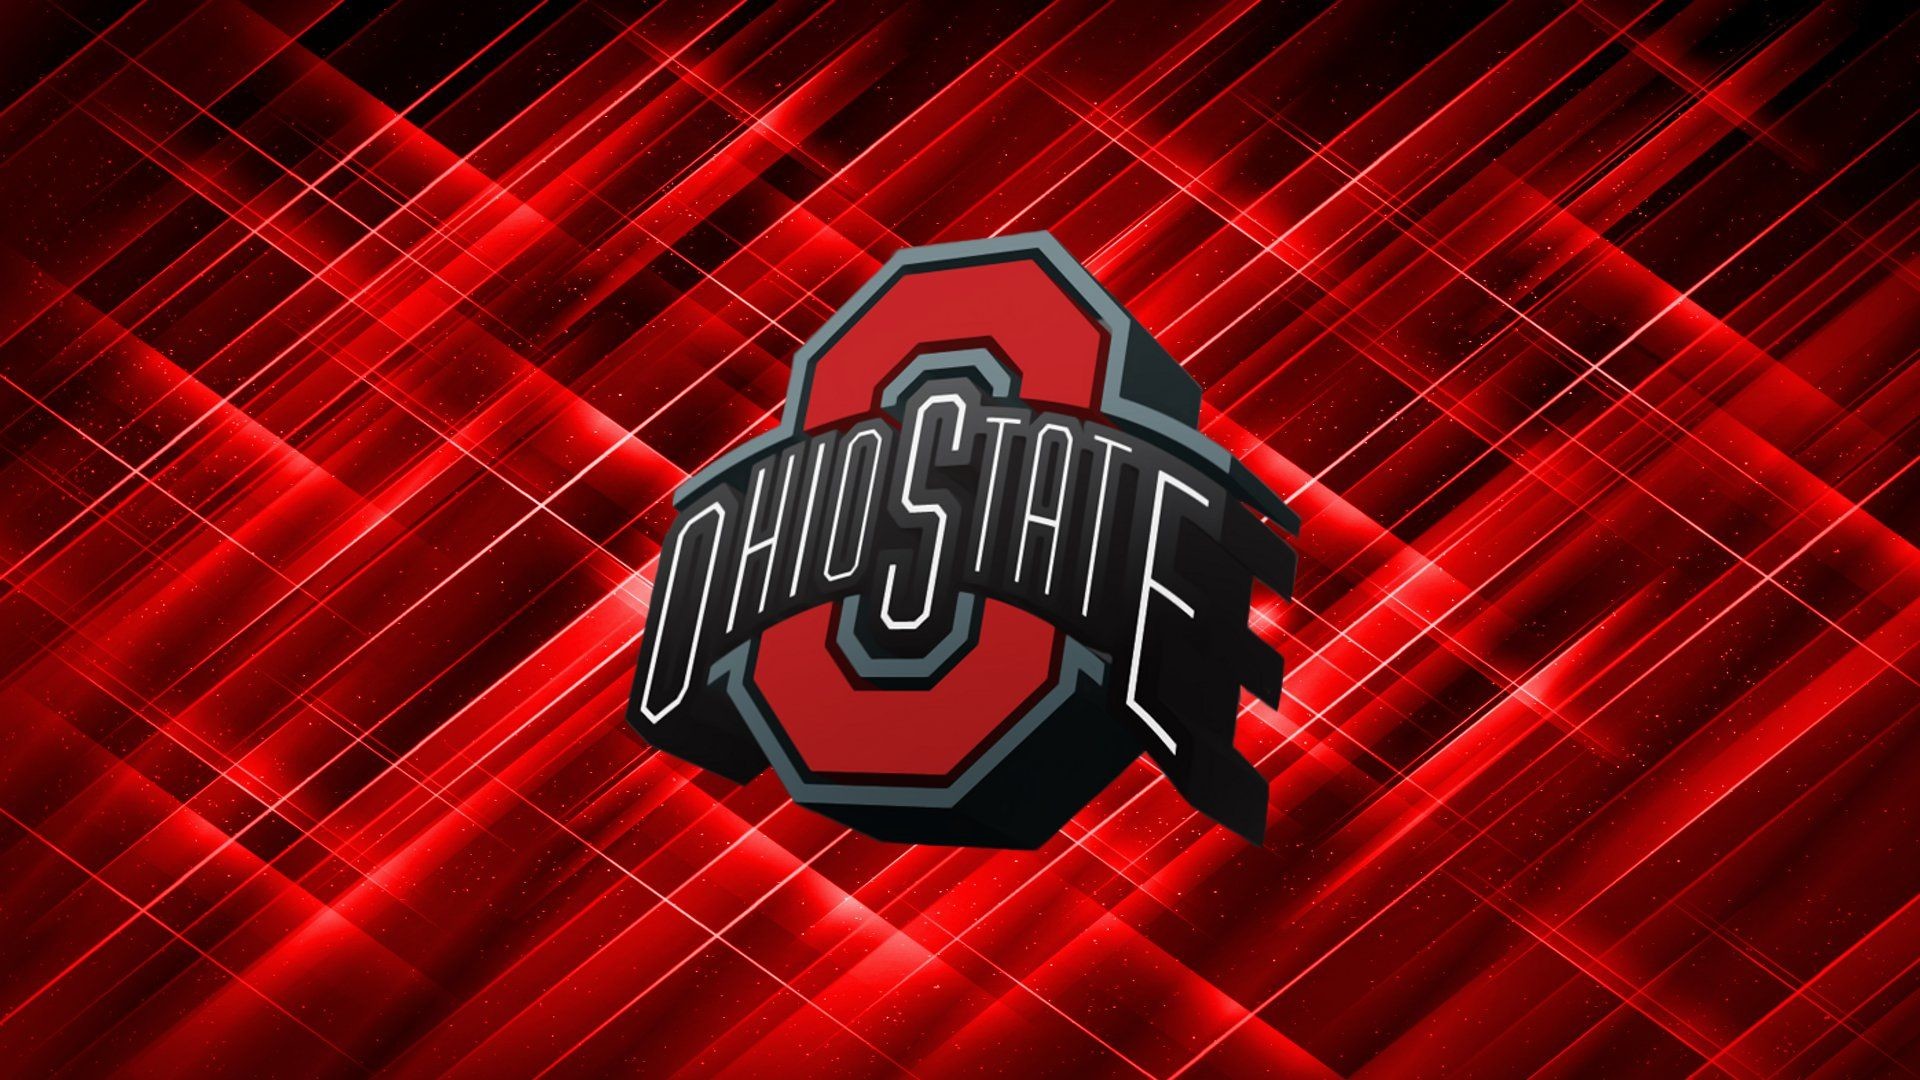 1920x1080 Ohio-State-Buckeyes-Football-Backgrounds-Download-wallpaper-wp2008627 -  hdwallpaper20.com